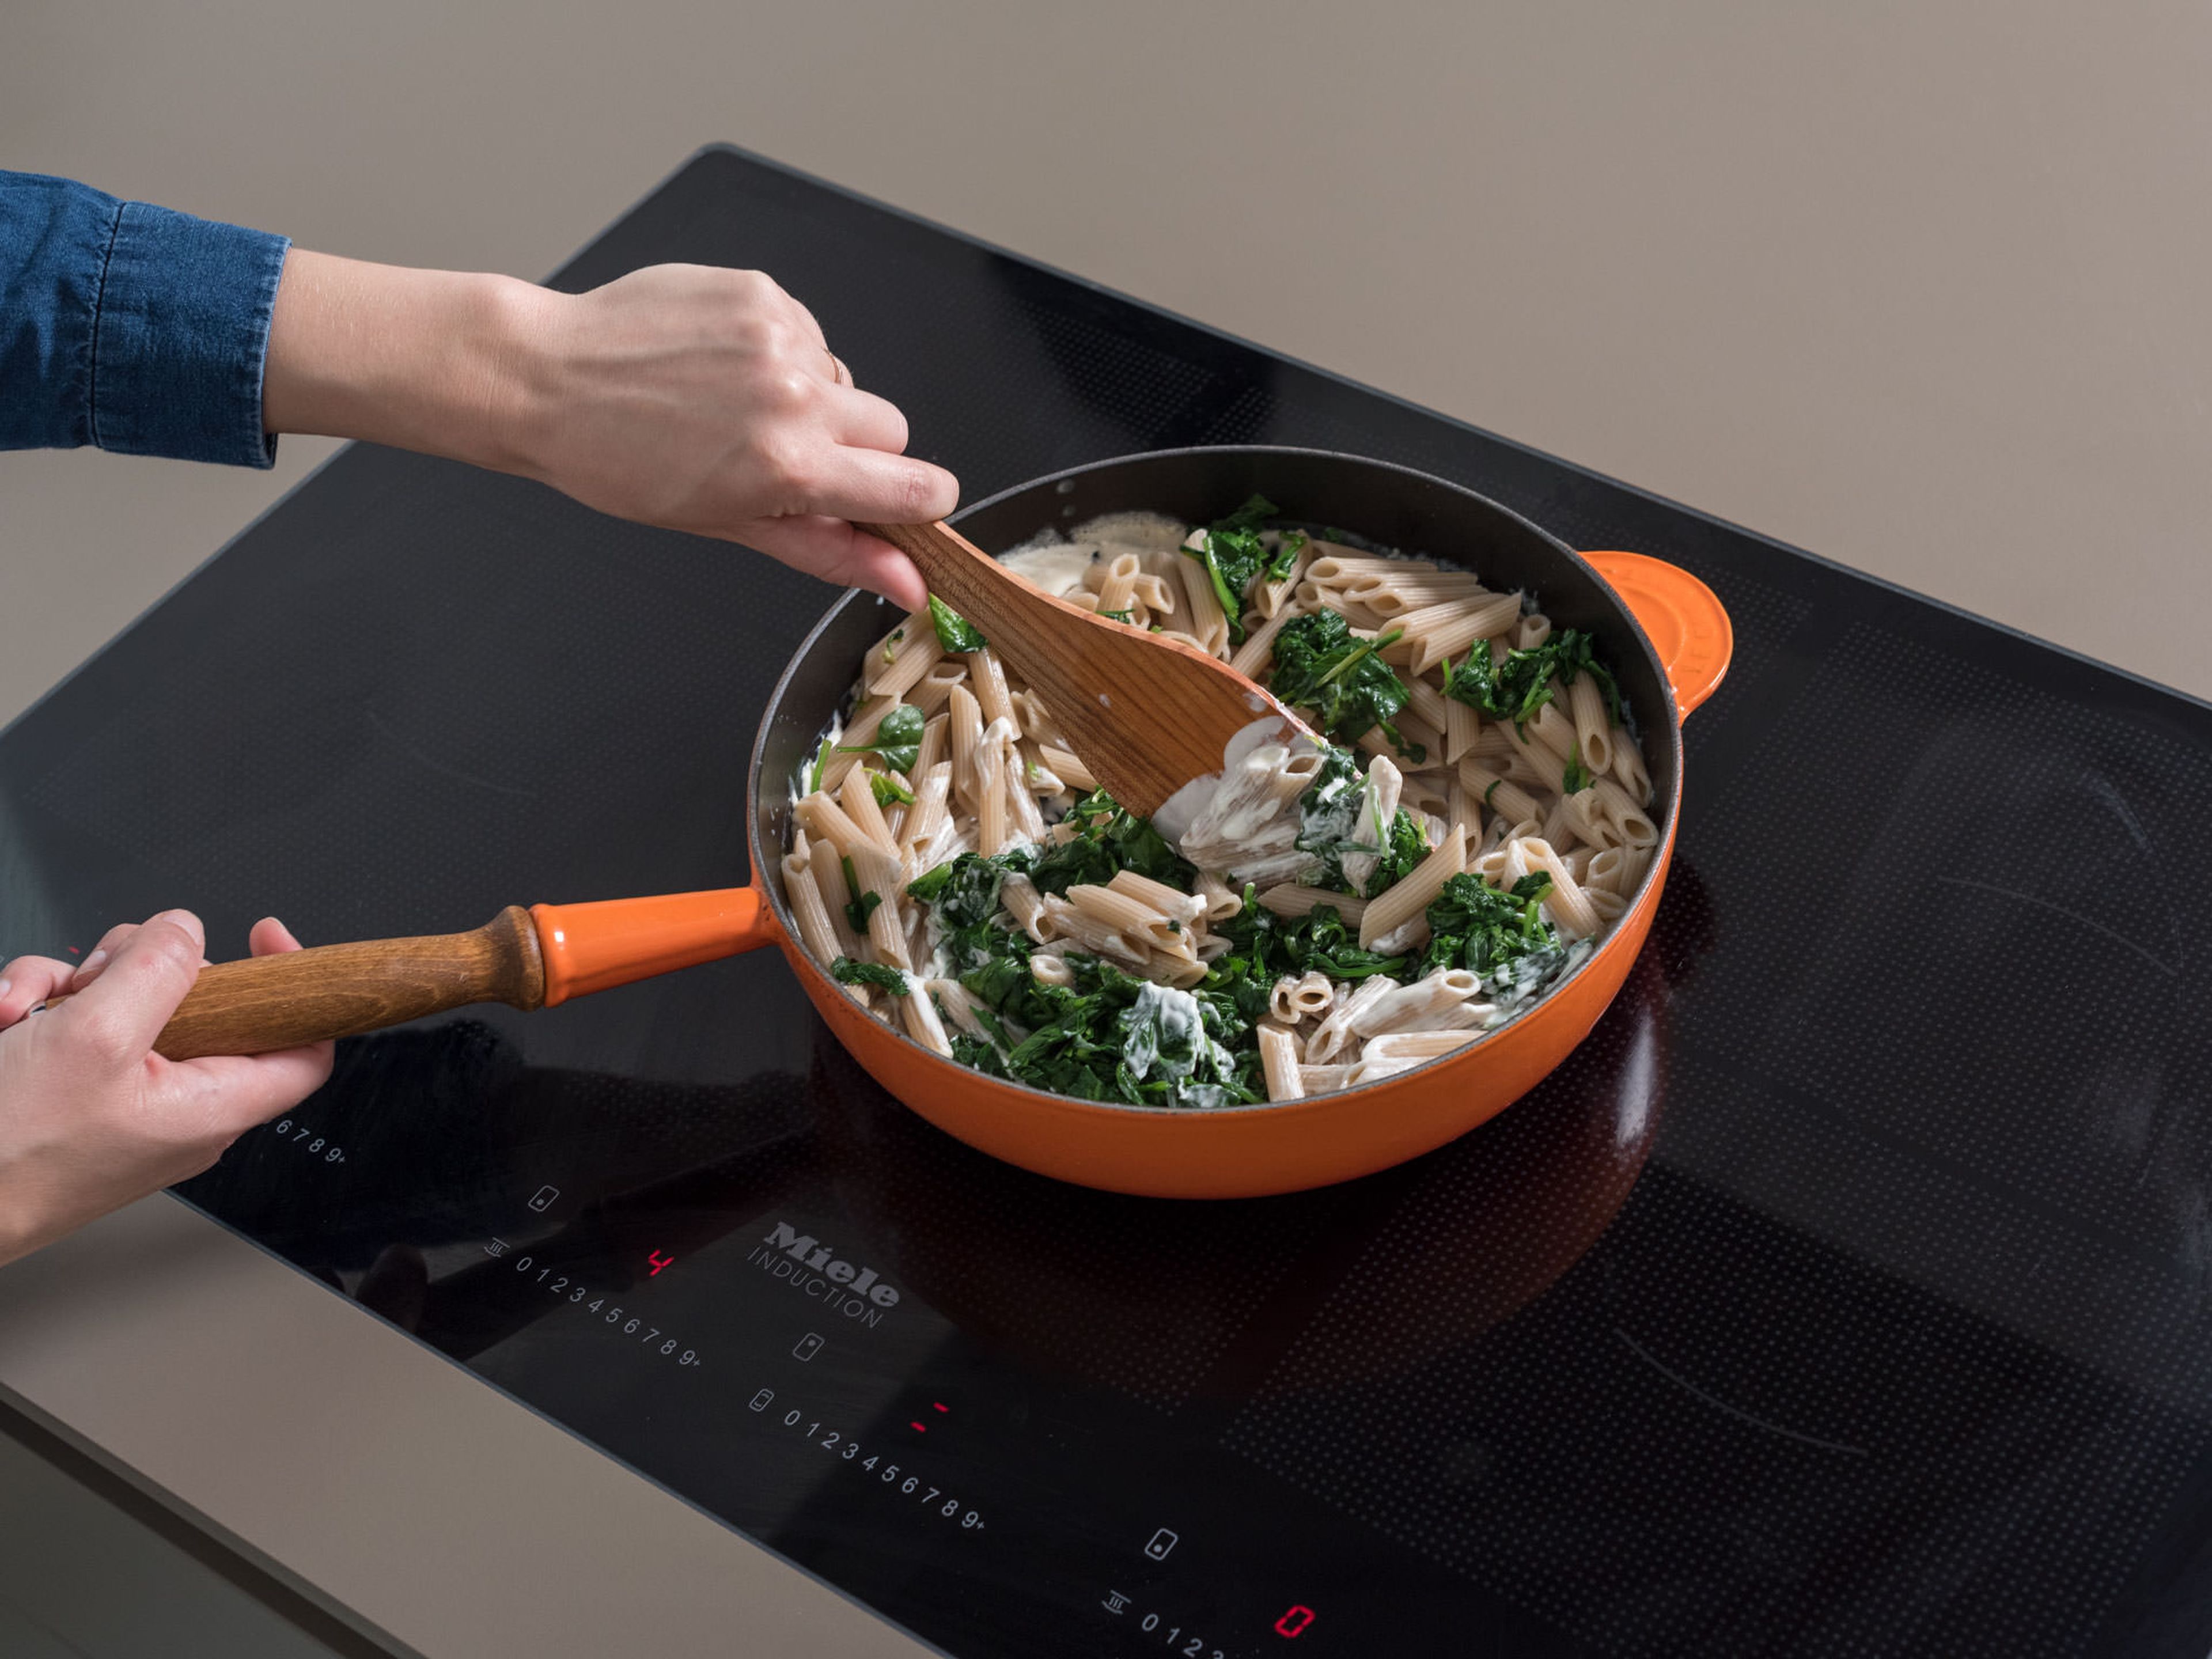 Add spinach and penne to the frying pan and stir. Add a few tablespoons of the reserved pasta water for desired consistency. Season with salt and pepper and serve with toasted pine nuts, more crumbled goat cheese, and Parmesan. Enjoy!